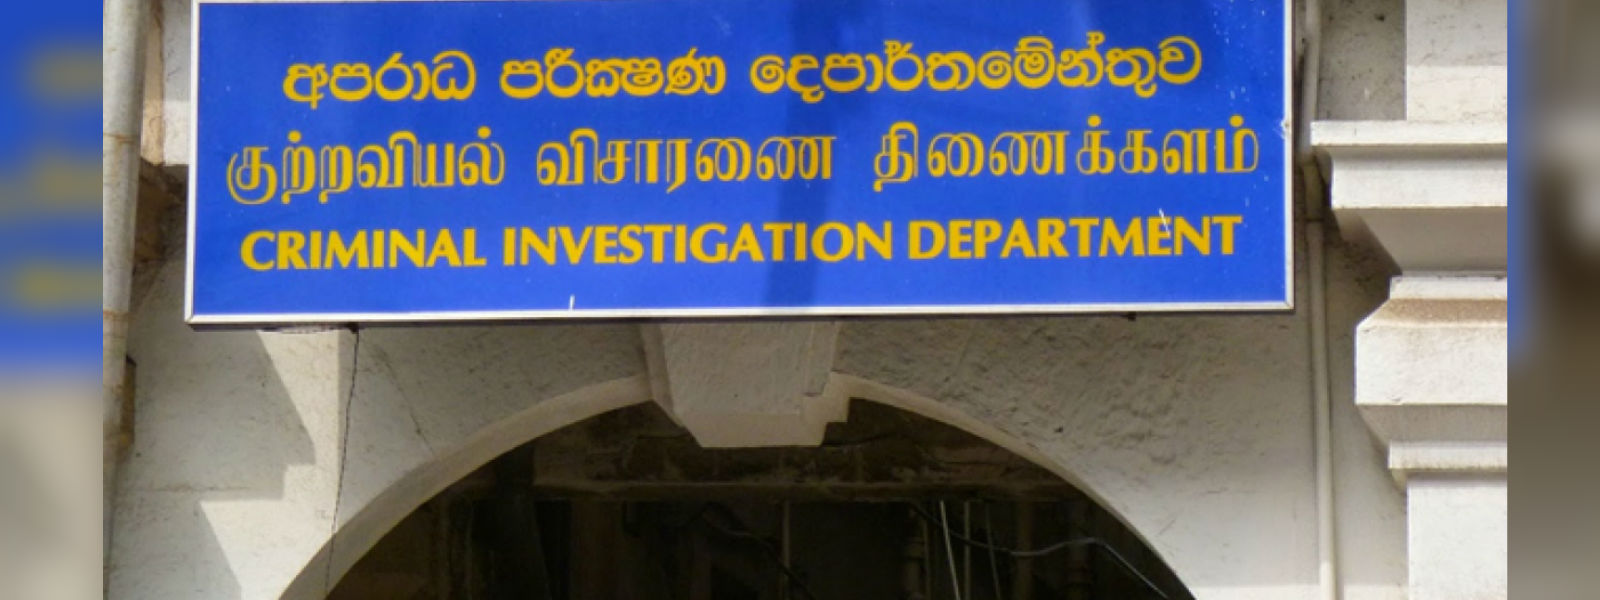 Swiss Embassy employee summoned to CID for 5th day